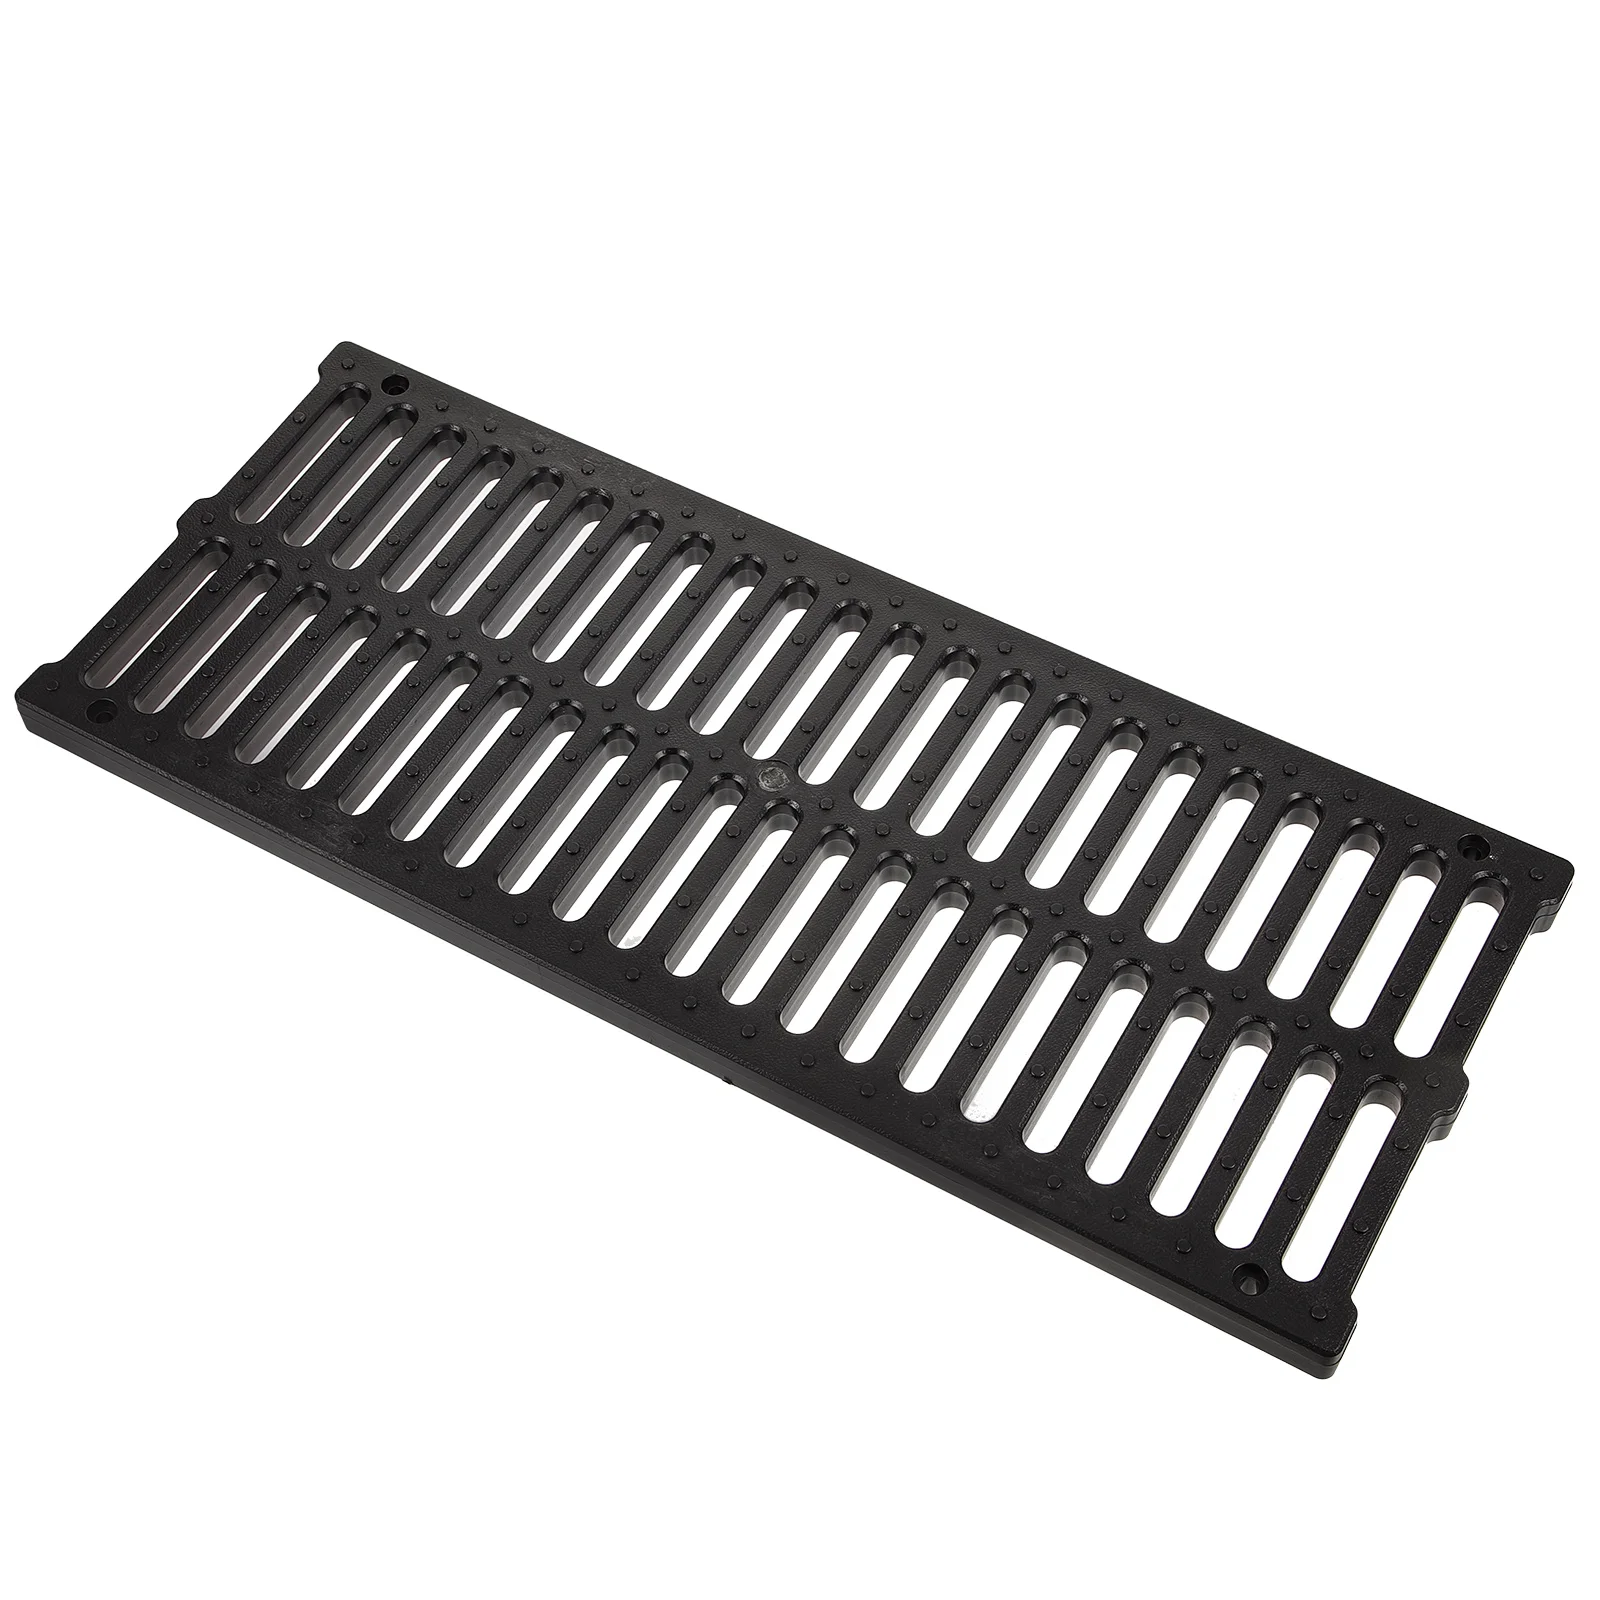 

Outdoor Sewer Cover Plastic Trench Cover Replaceable Trench Grate Sewer Accessory